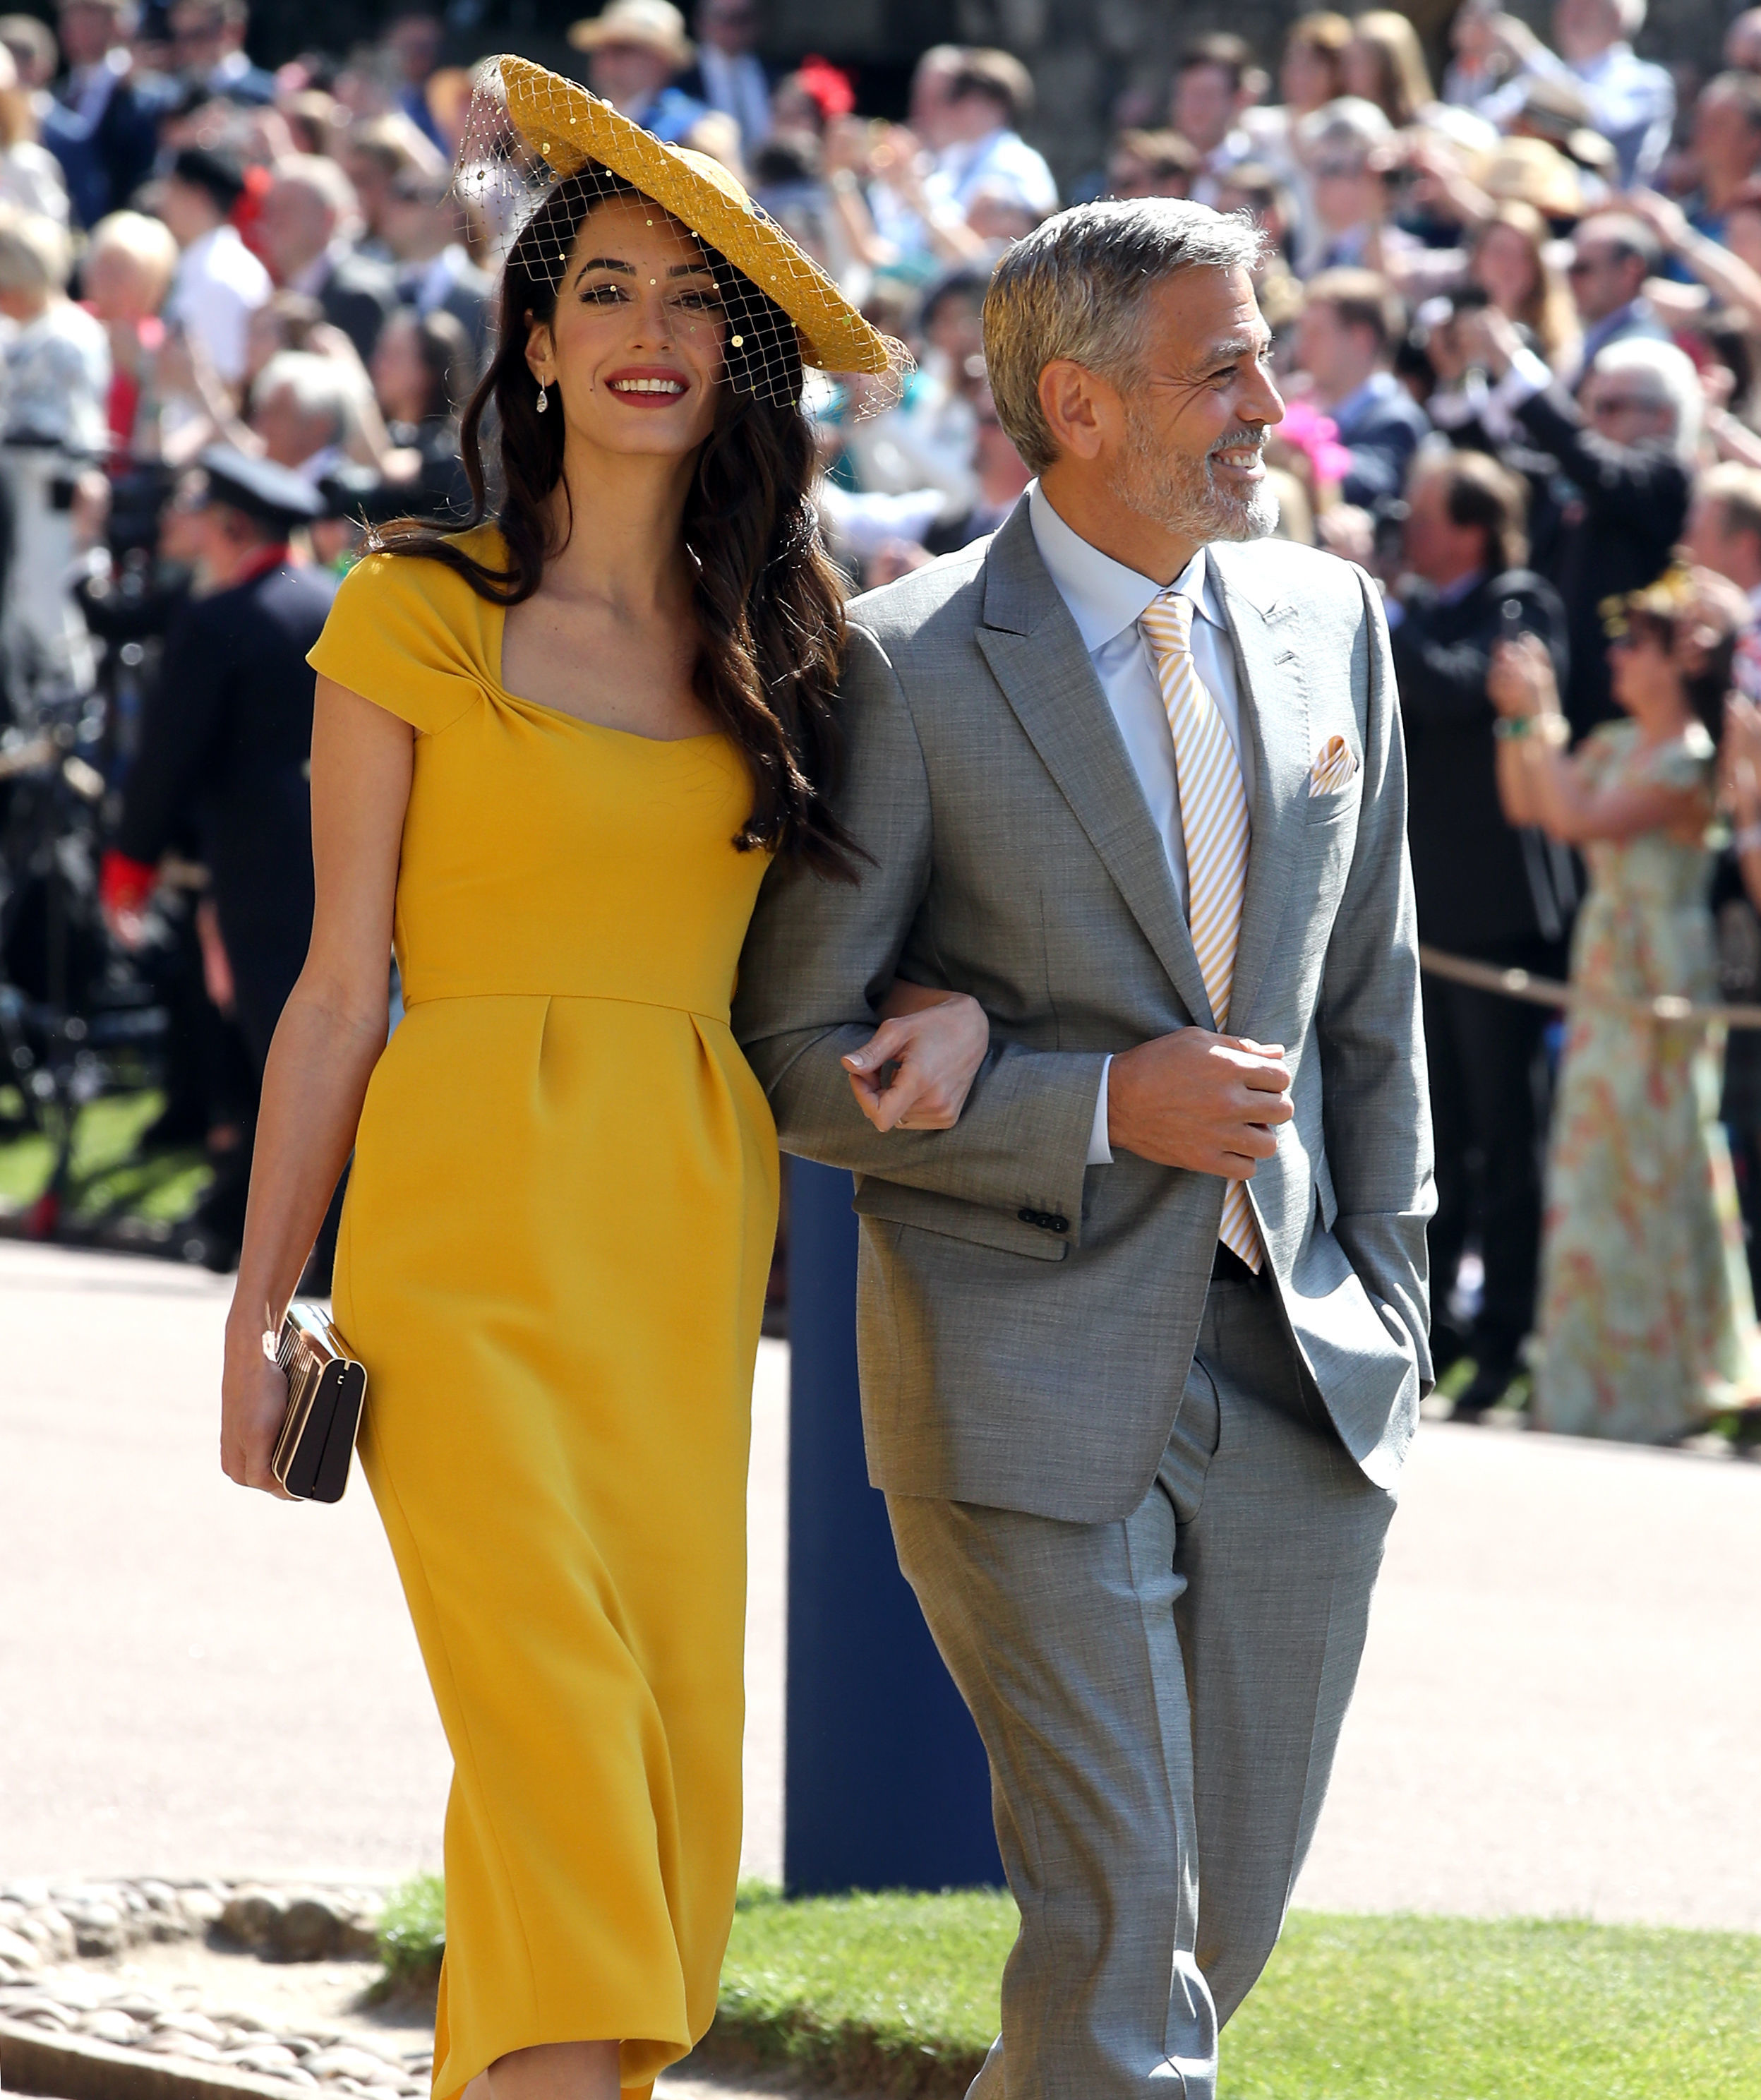 Amal Clooney and George Clooney in Windsor, England, on May 19, 2018 | Source: Getty Images